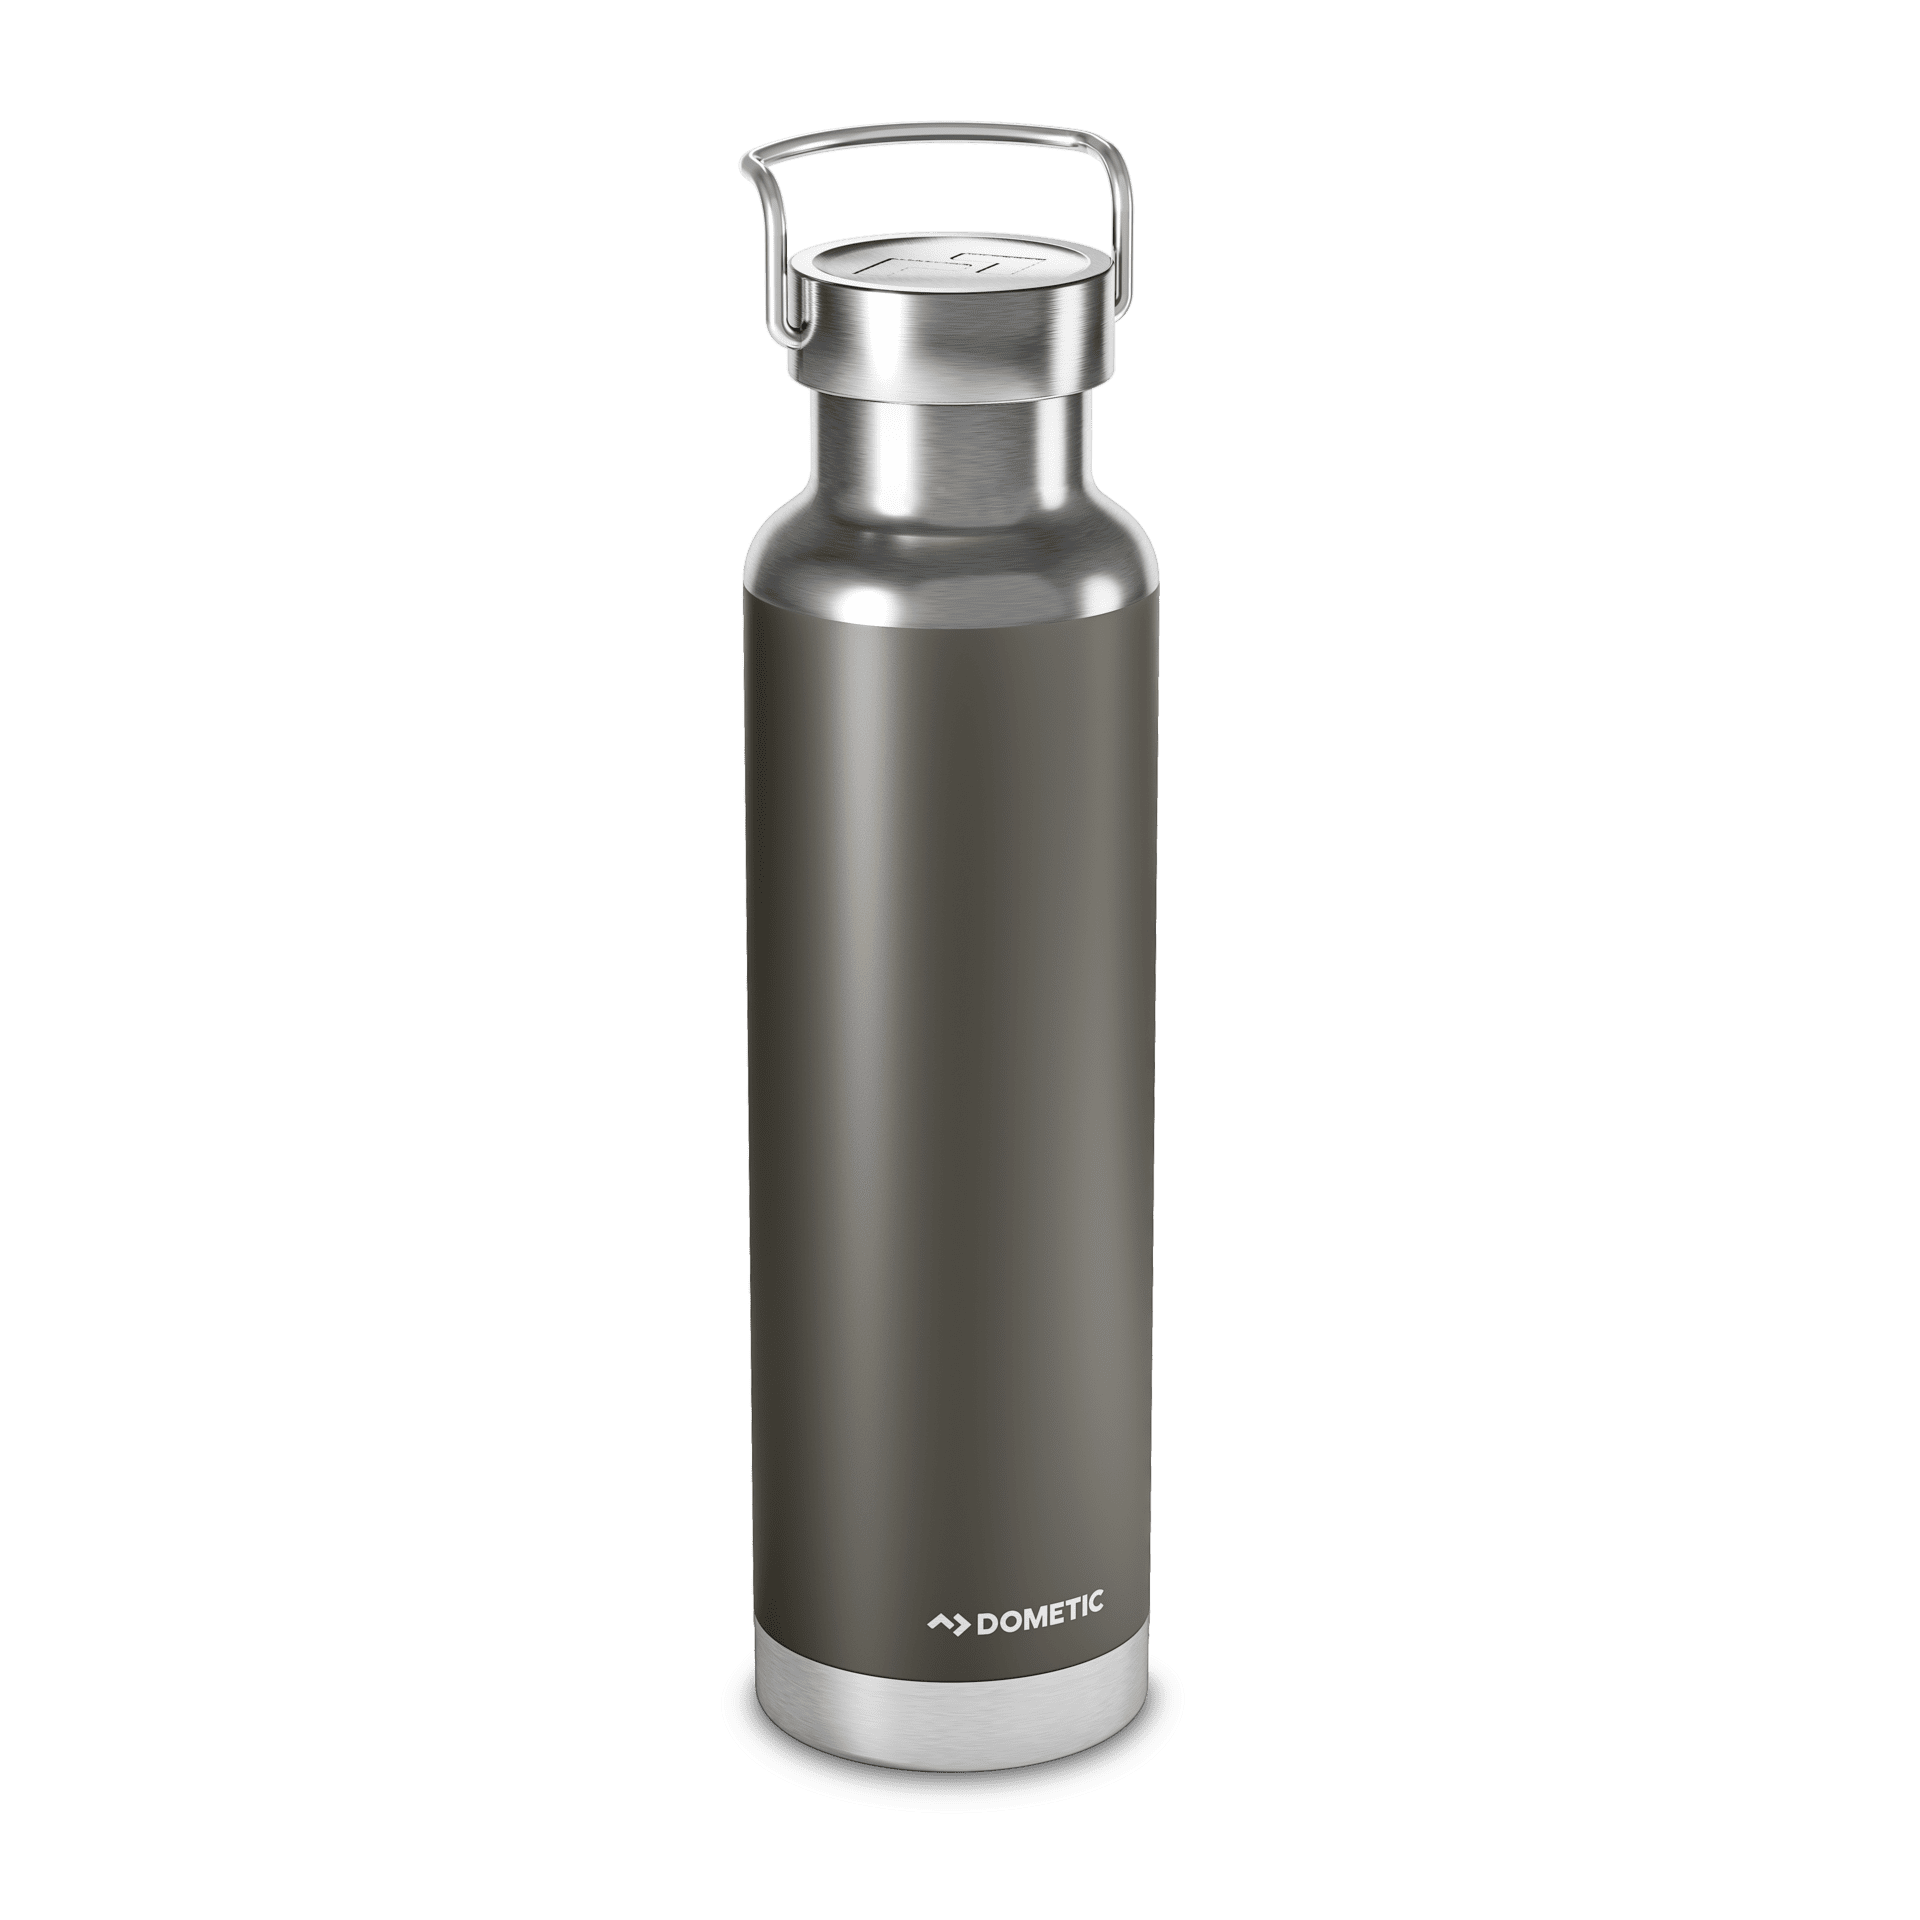 Thermos Bottle PNG รูปภาพฟรี